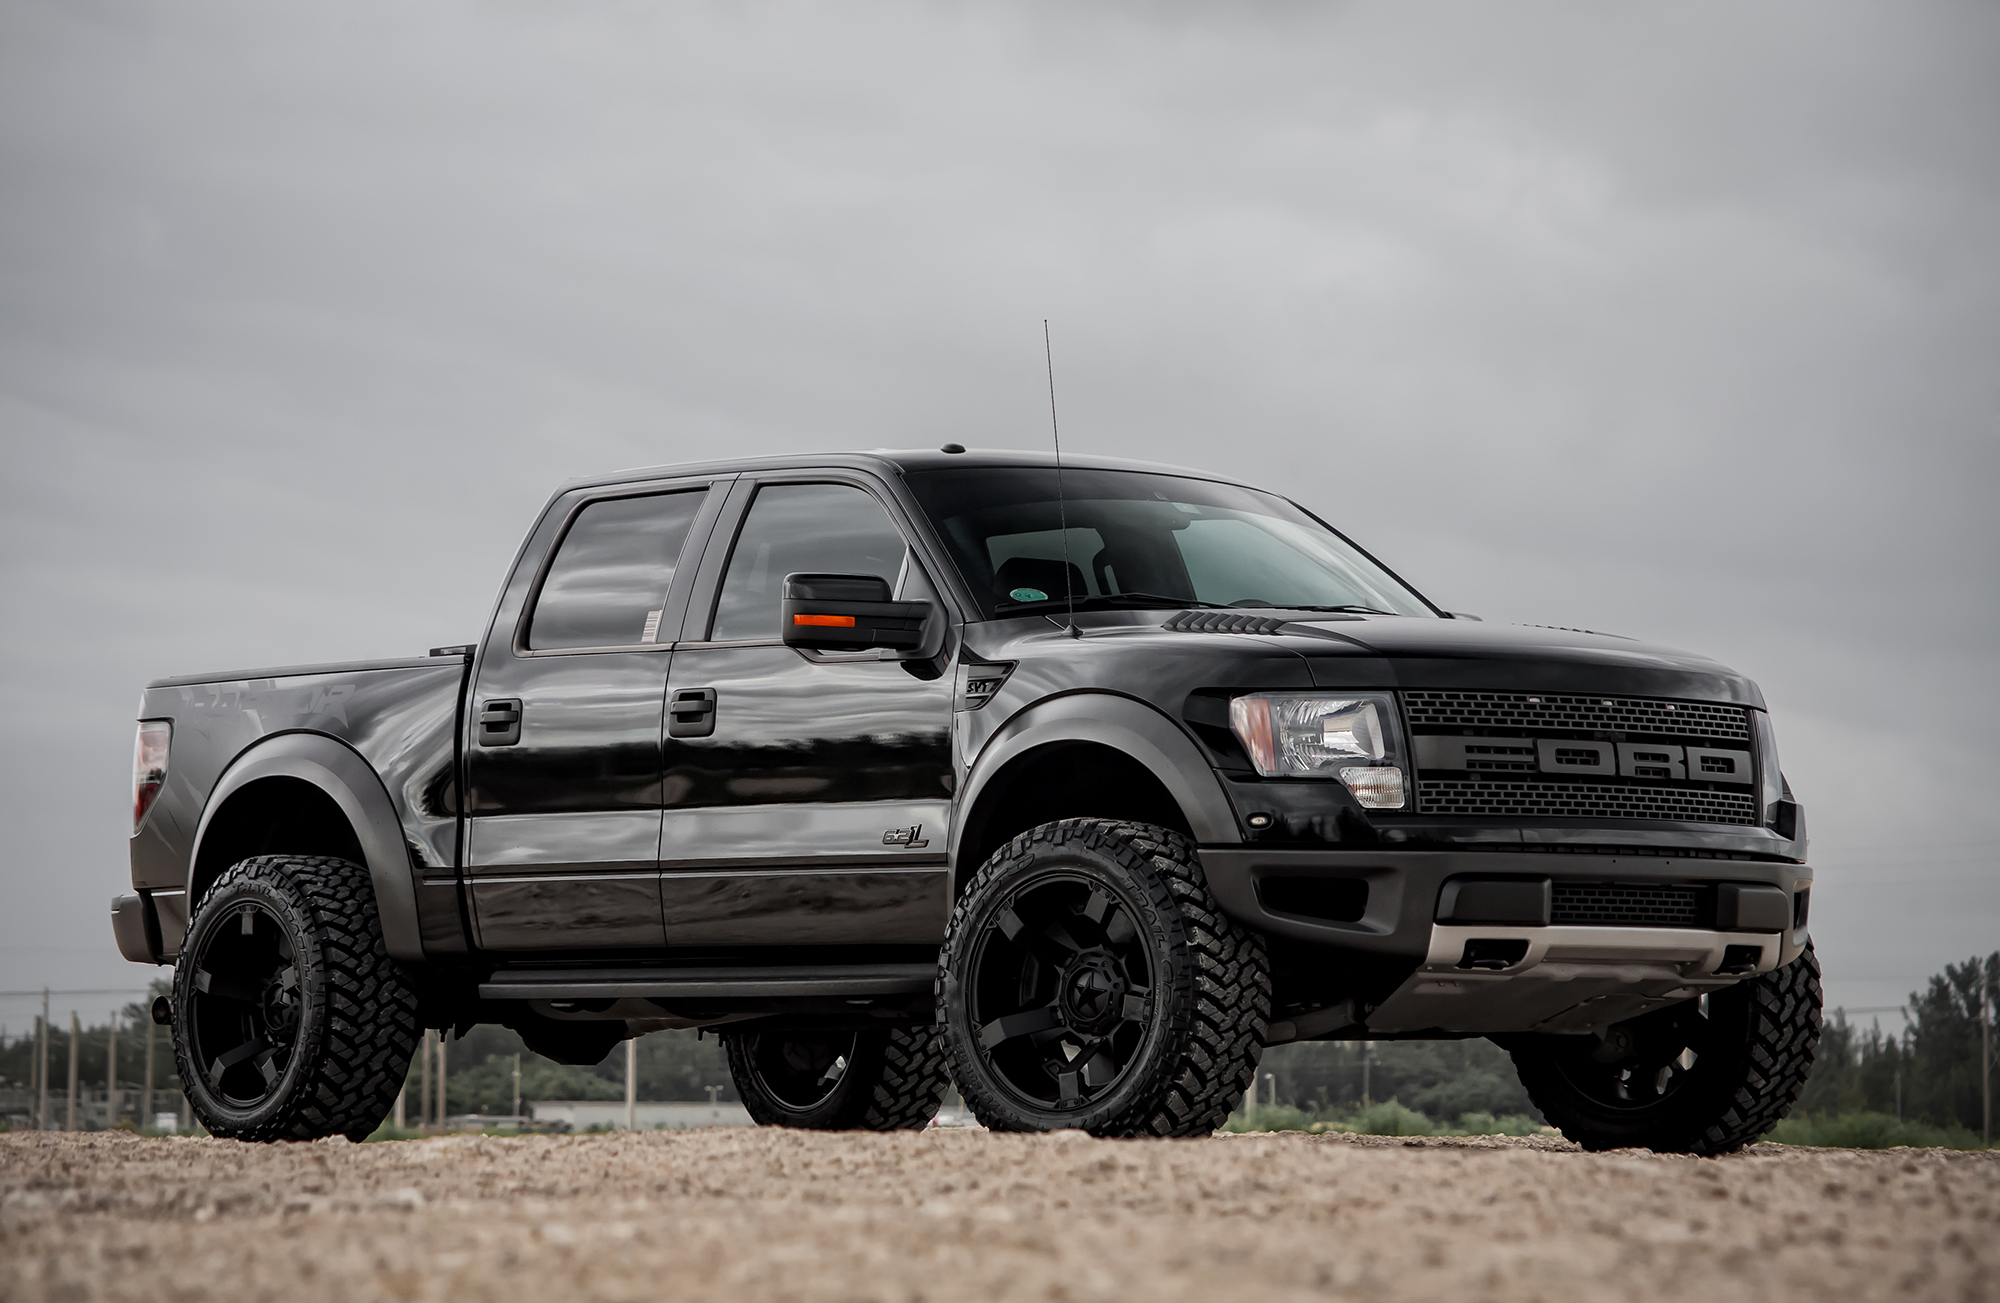 Ford Raptor Backgrounds, Compatible - PC, Mobile, Gadgets| 2000x1303 px